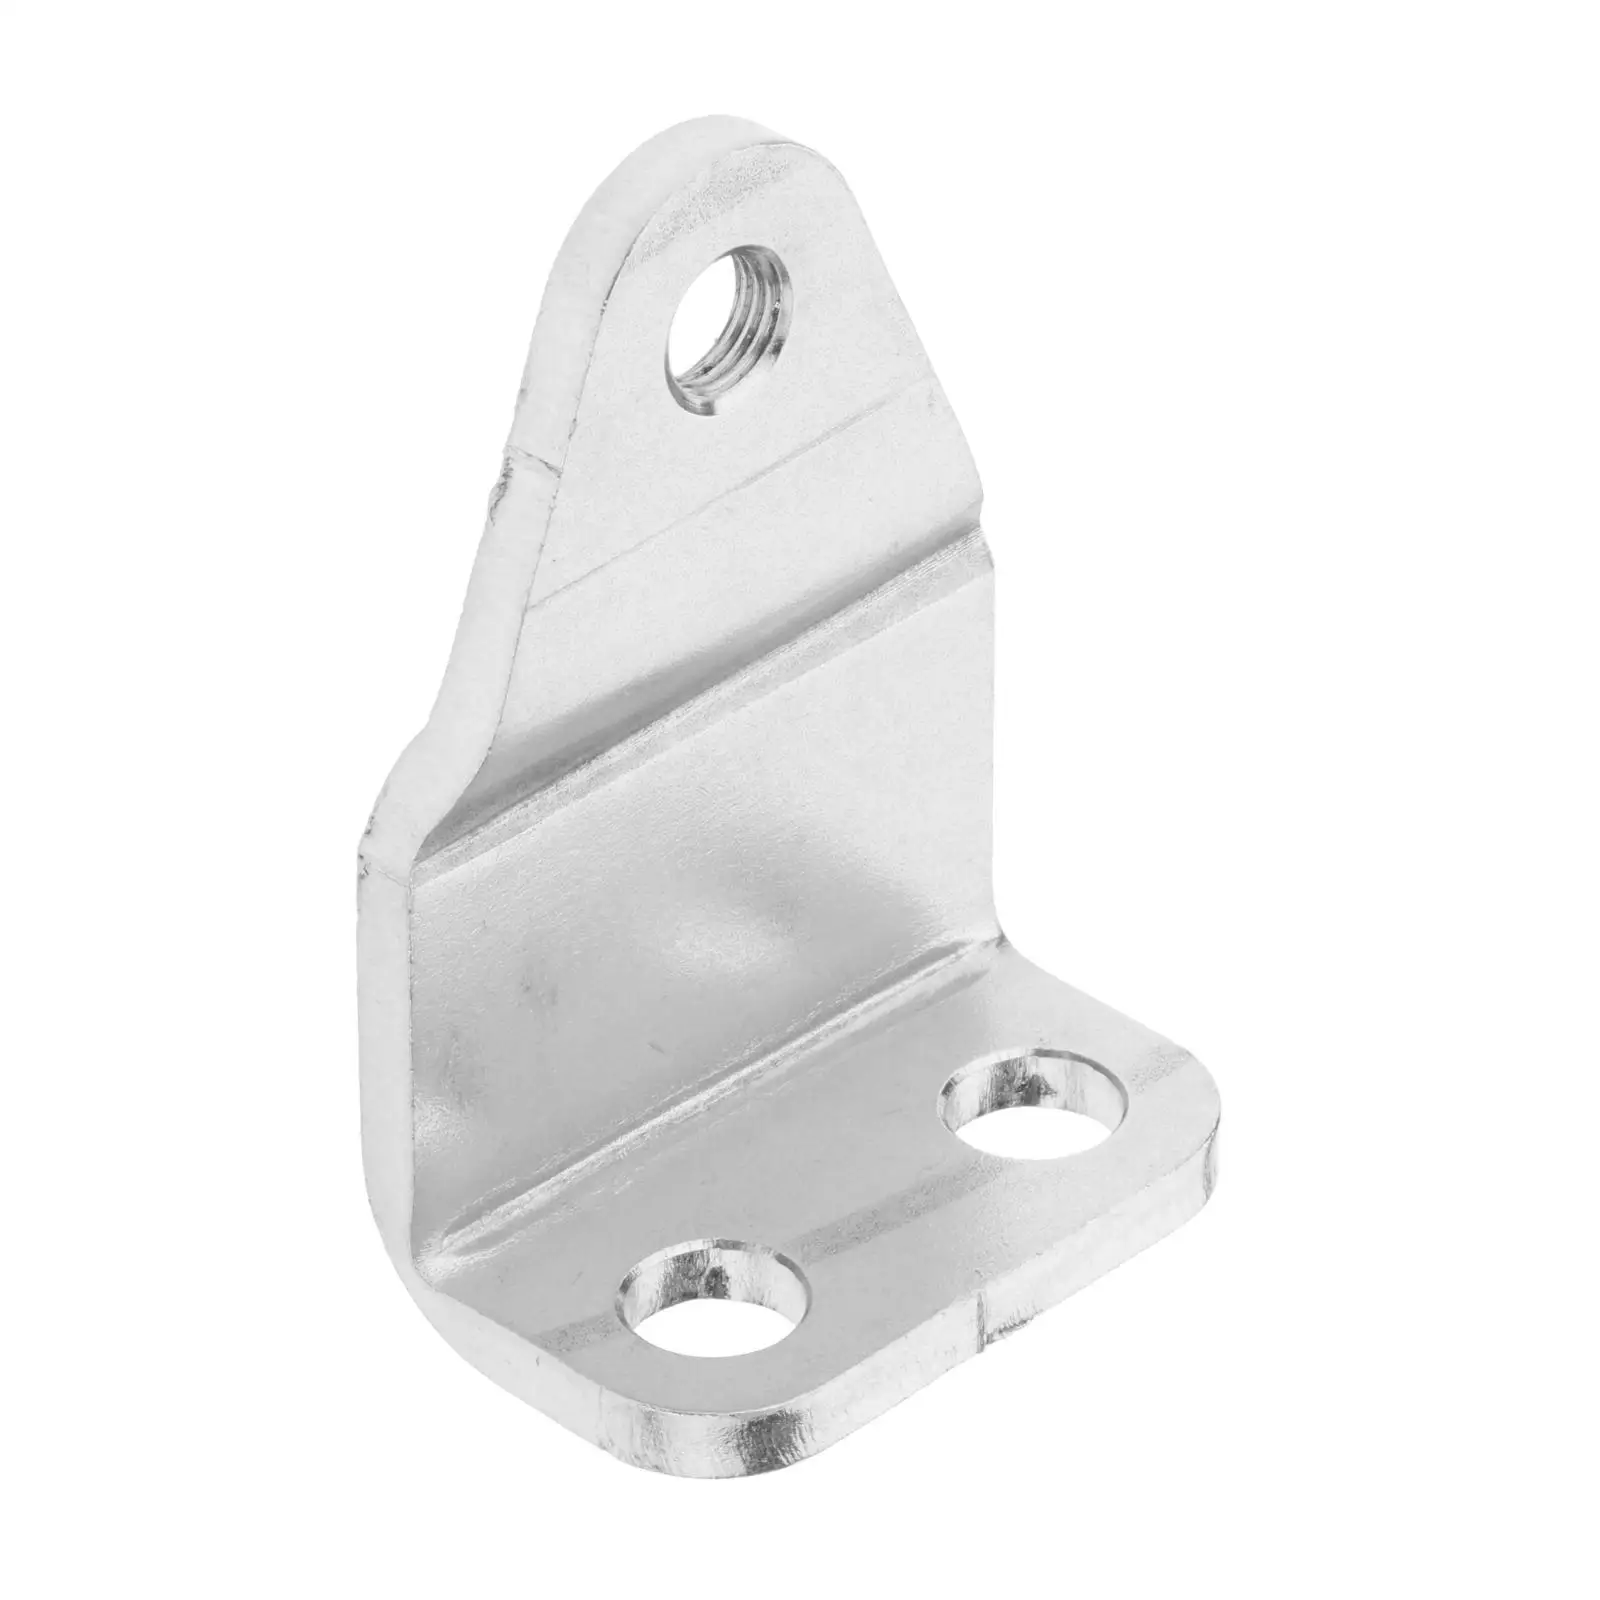 Steering Hook 65W-48511-00 Fits for Outboard